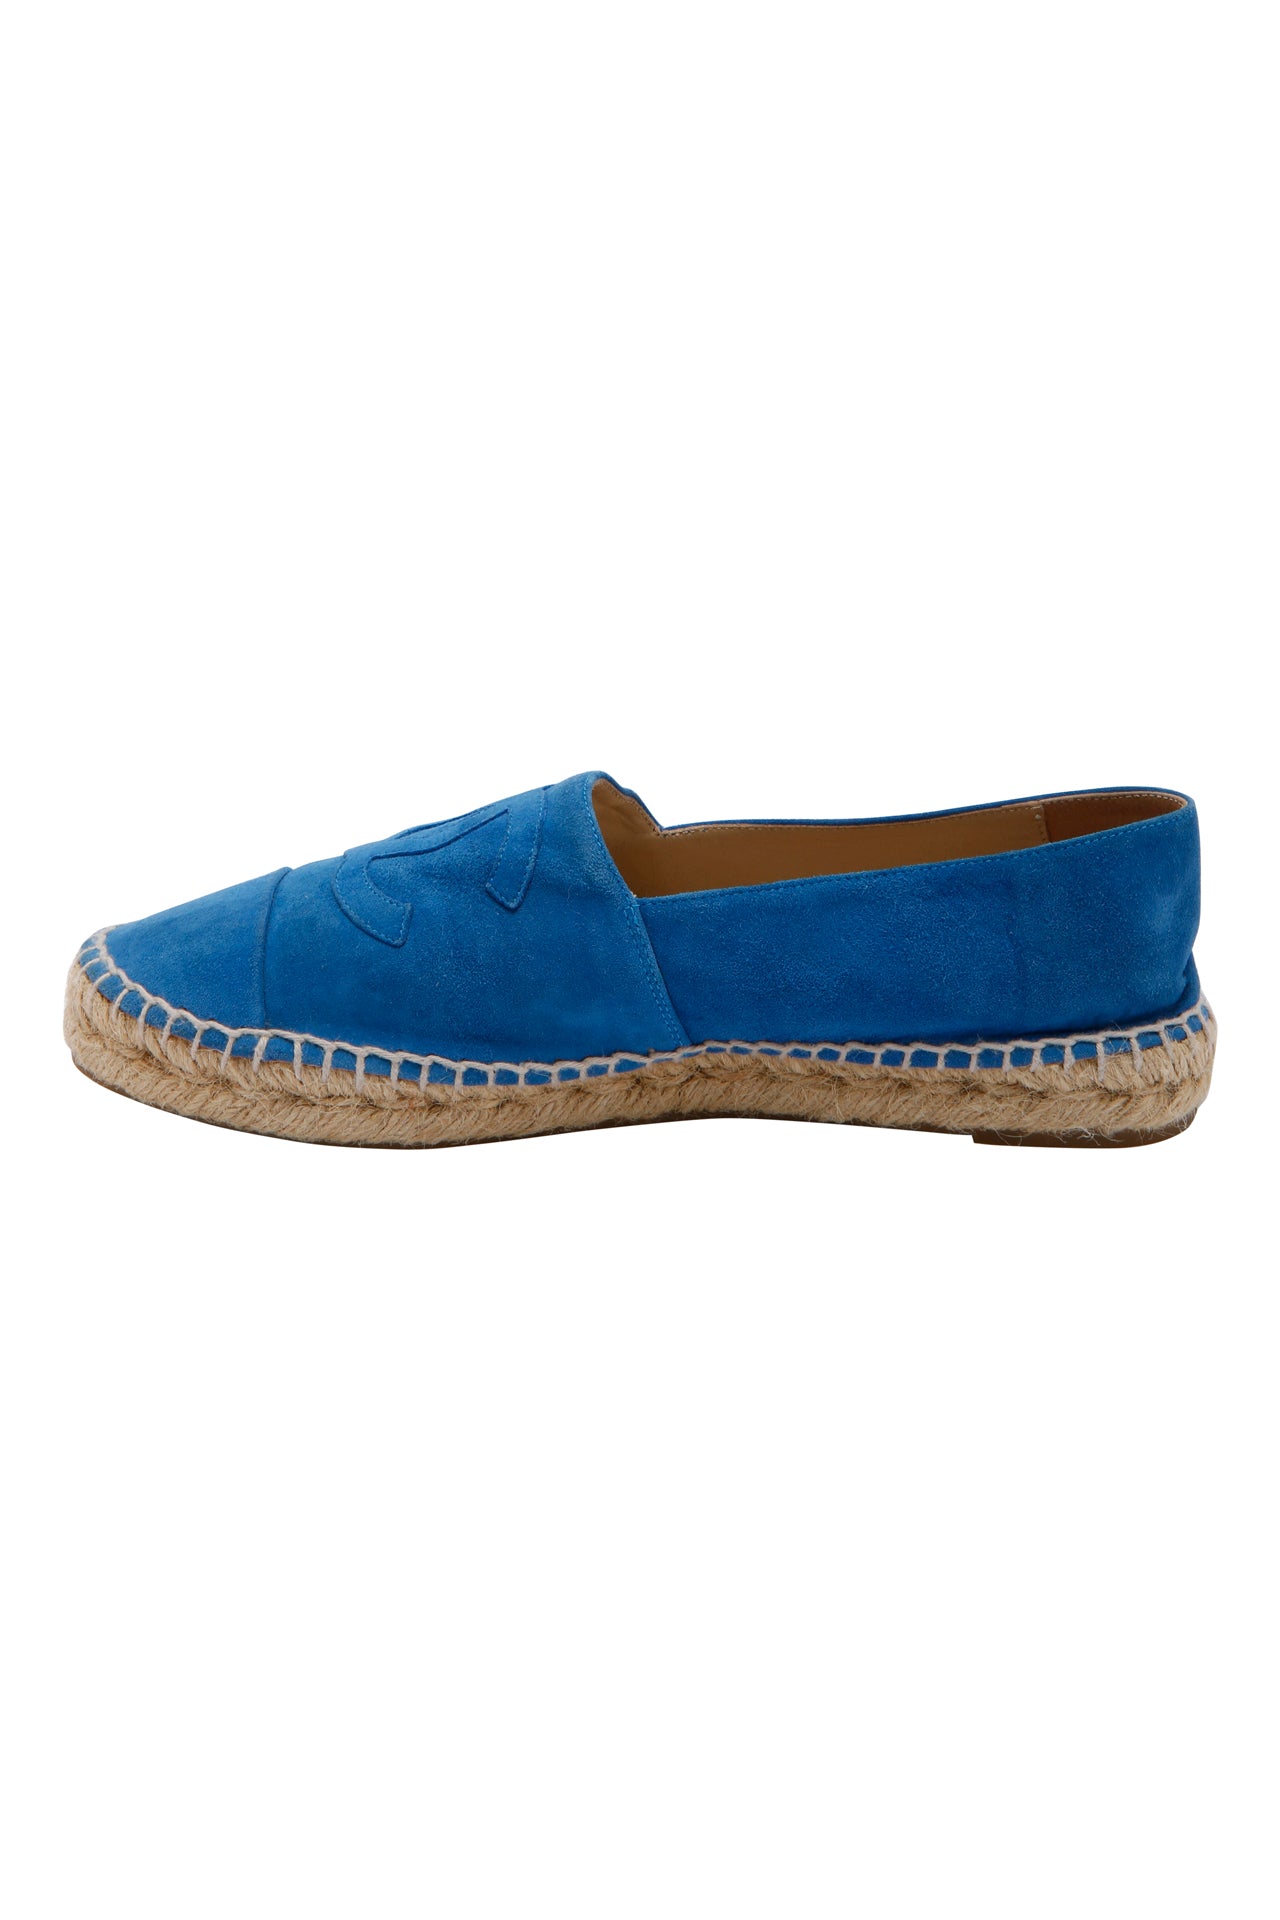 Trainers Chanel Blue size 37 EU in Suede - 22223025